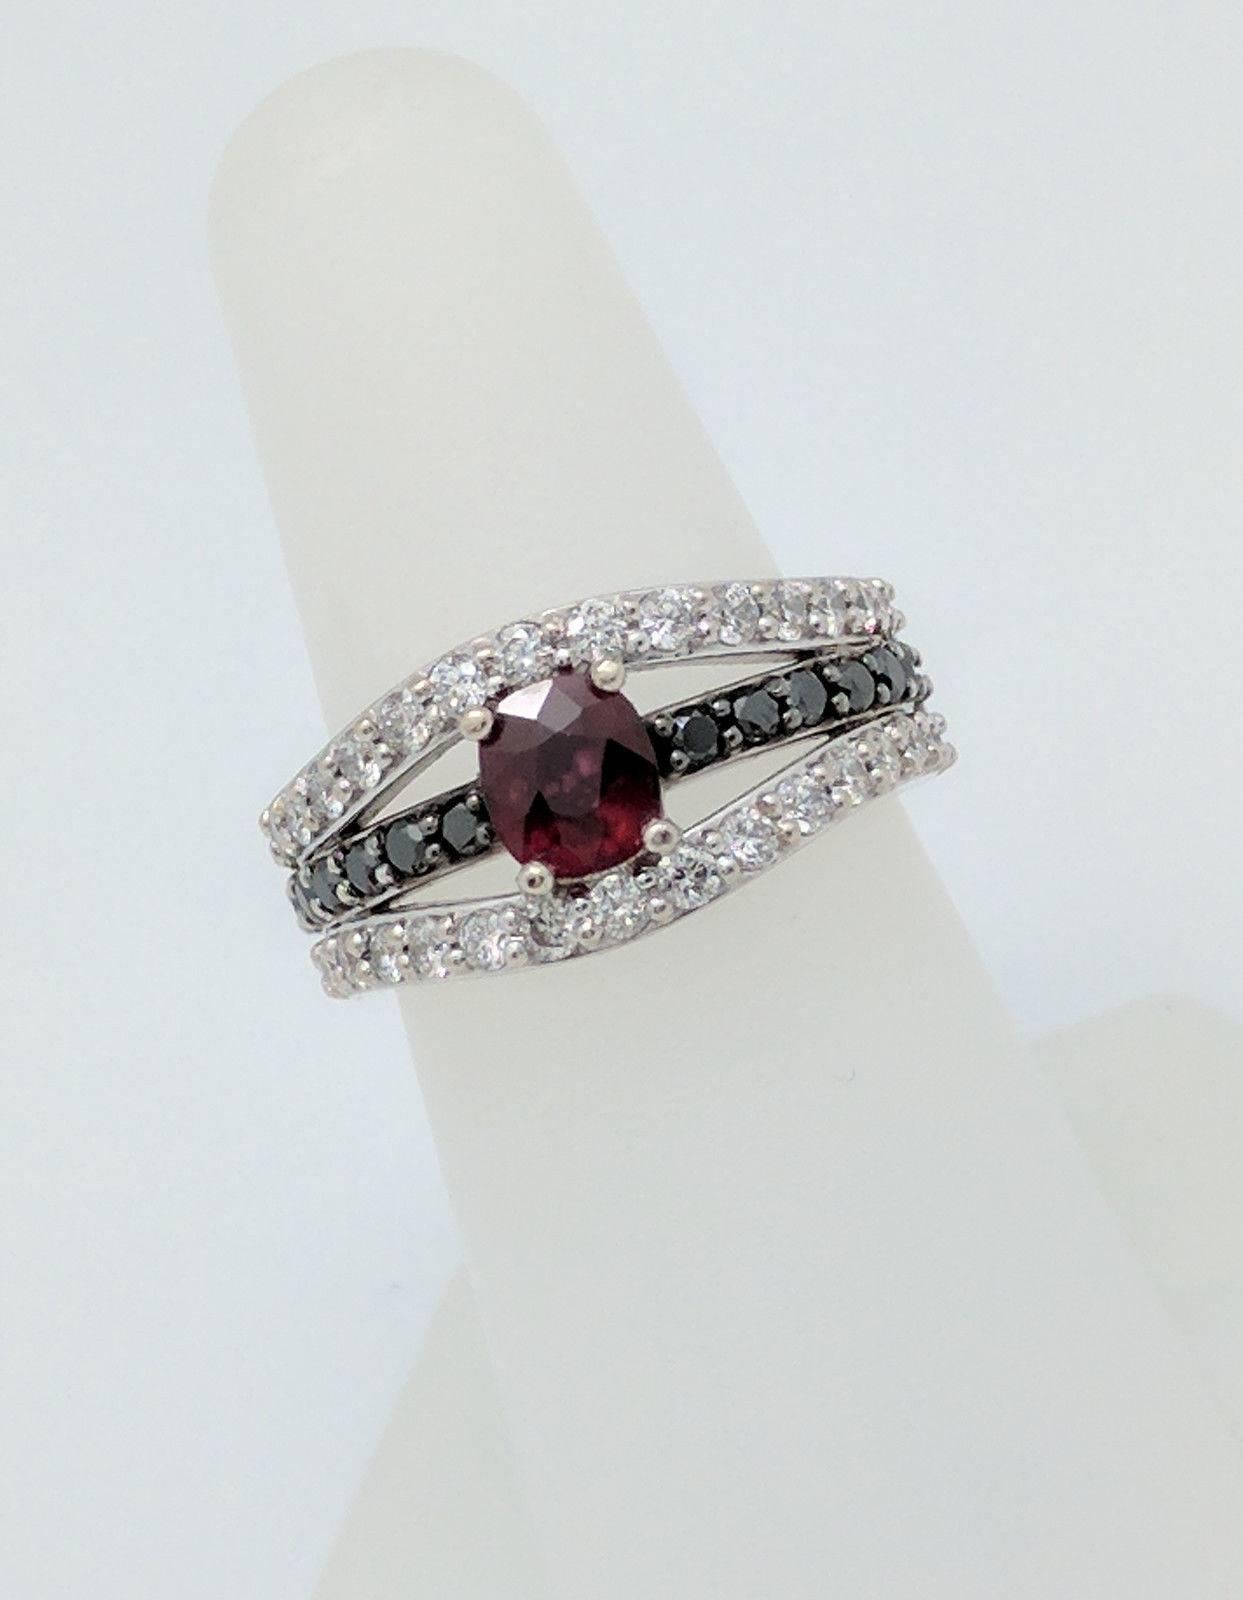 You are viewing a beautiful custom made ruby, black and white diamond ring. Any woman would love to add this piece to their collection!

This ring is crafted from 14k white gold and weighs 10 grams.  It features (1) .50ct natural black box ruby,